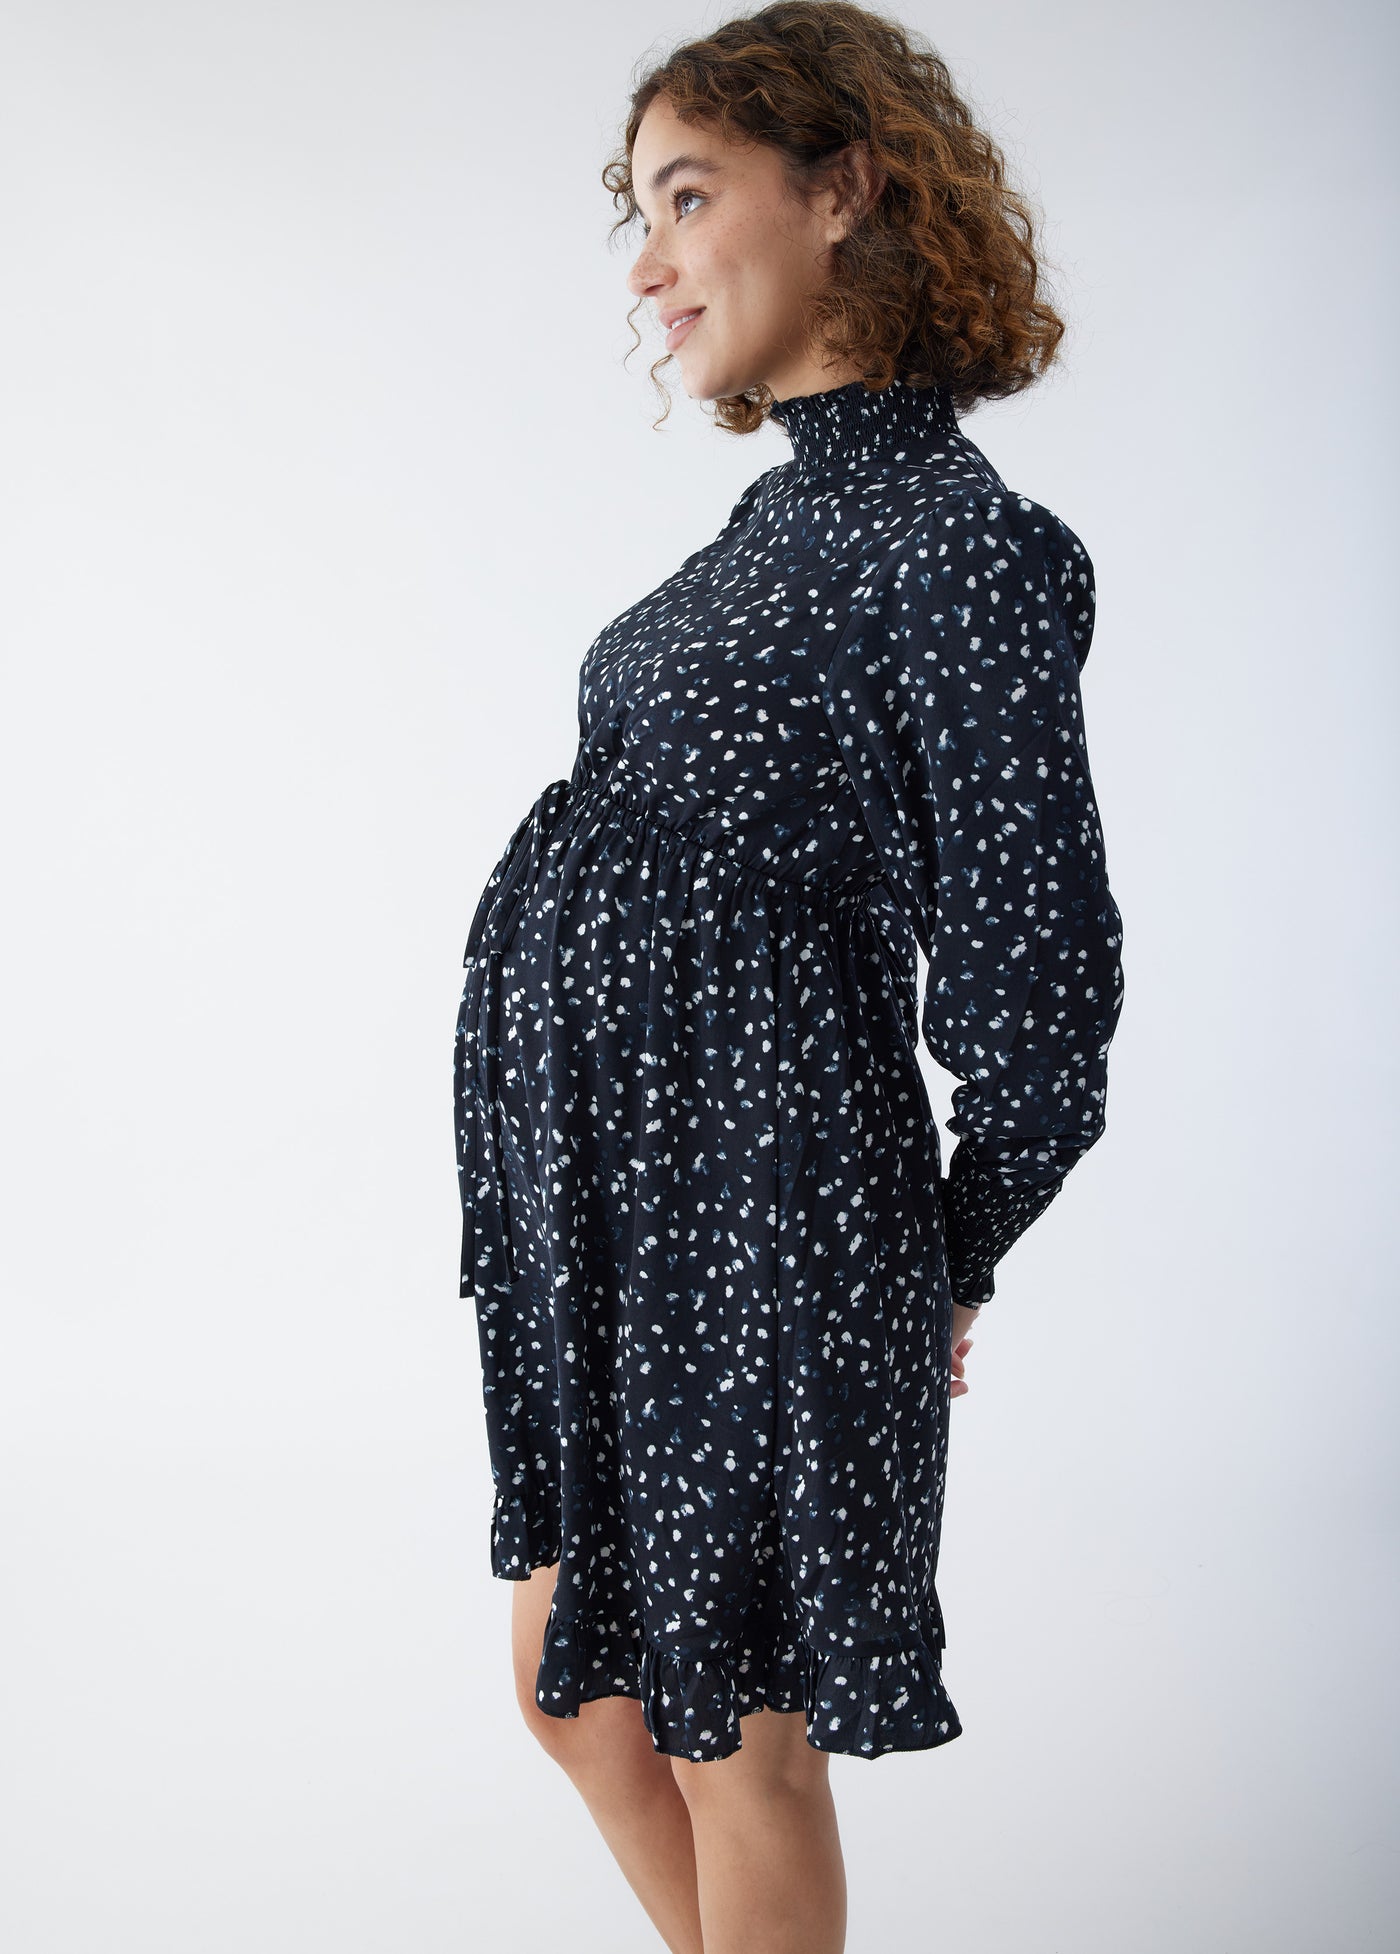 Tashi is 5’7", 24 weeks pregnant, and wearing size small||Dot